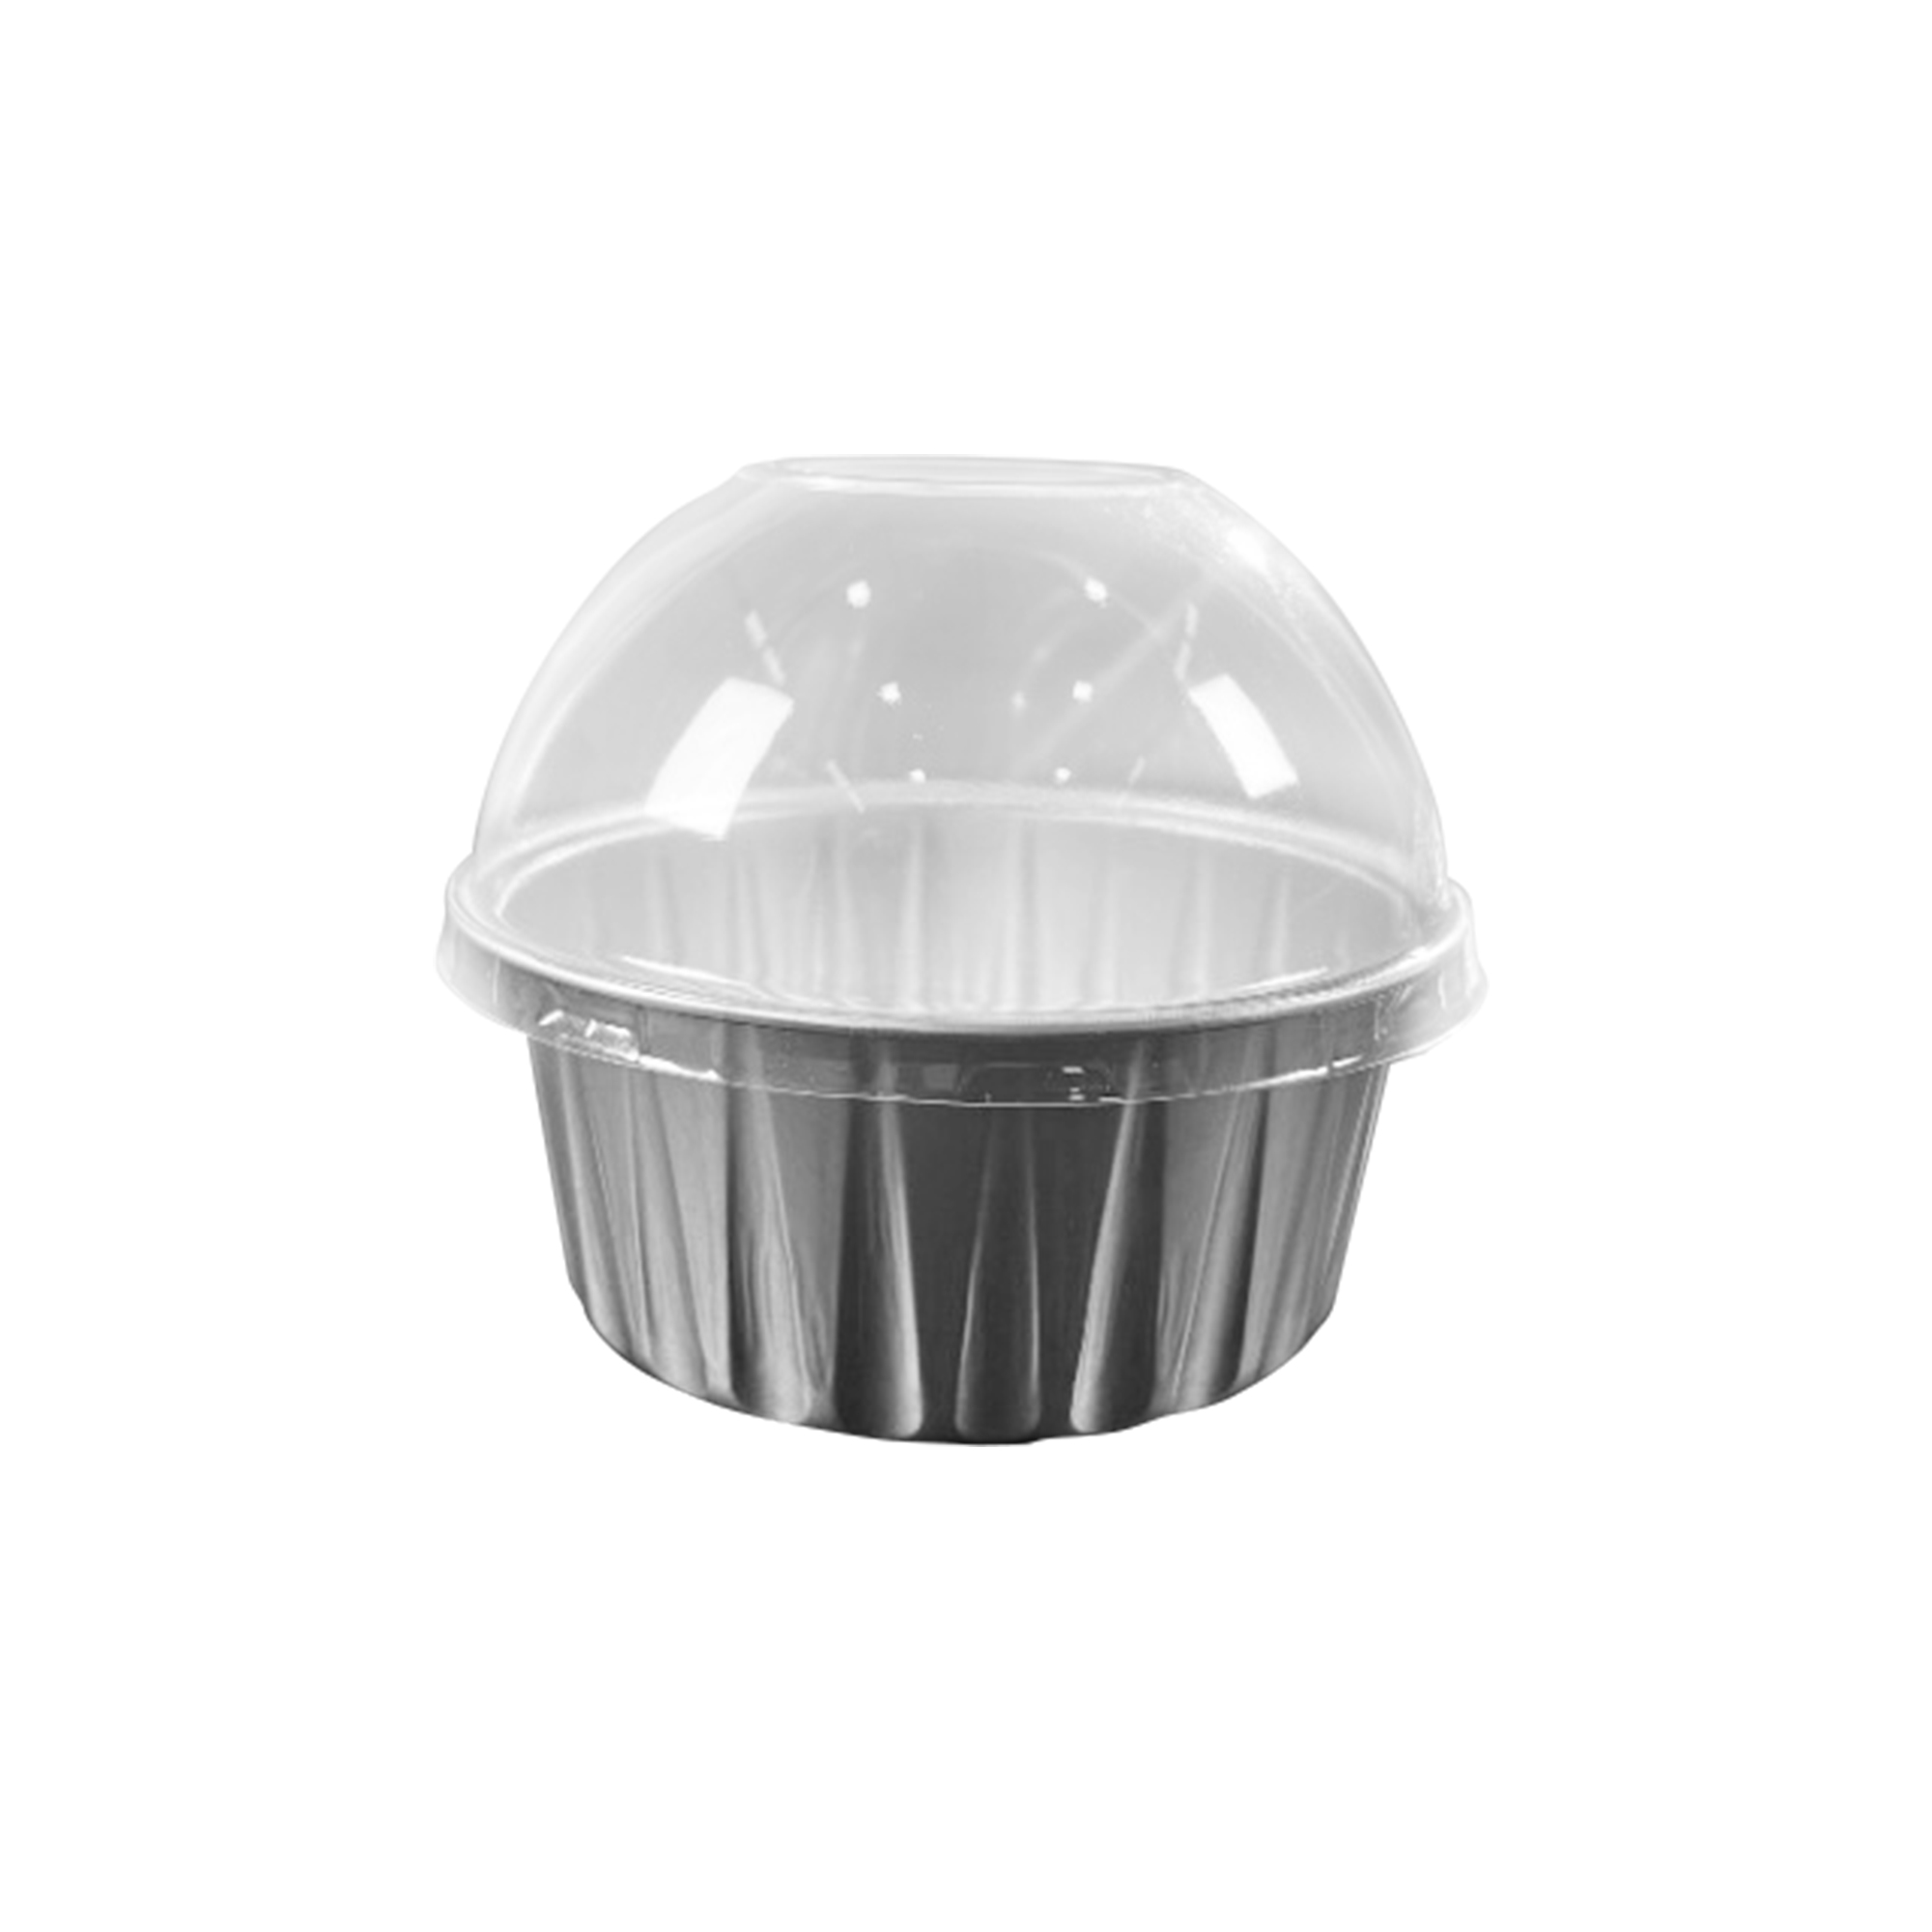 4oz Round Aluminum Baking Cup With Dome Lid 50pc/pack - Silver